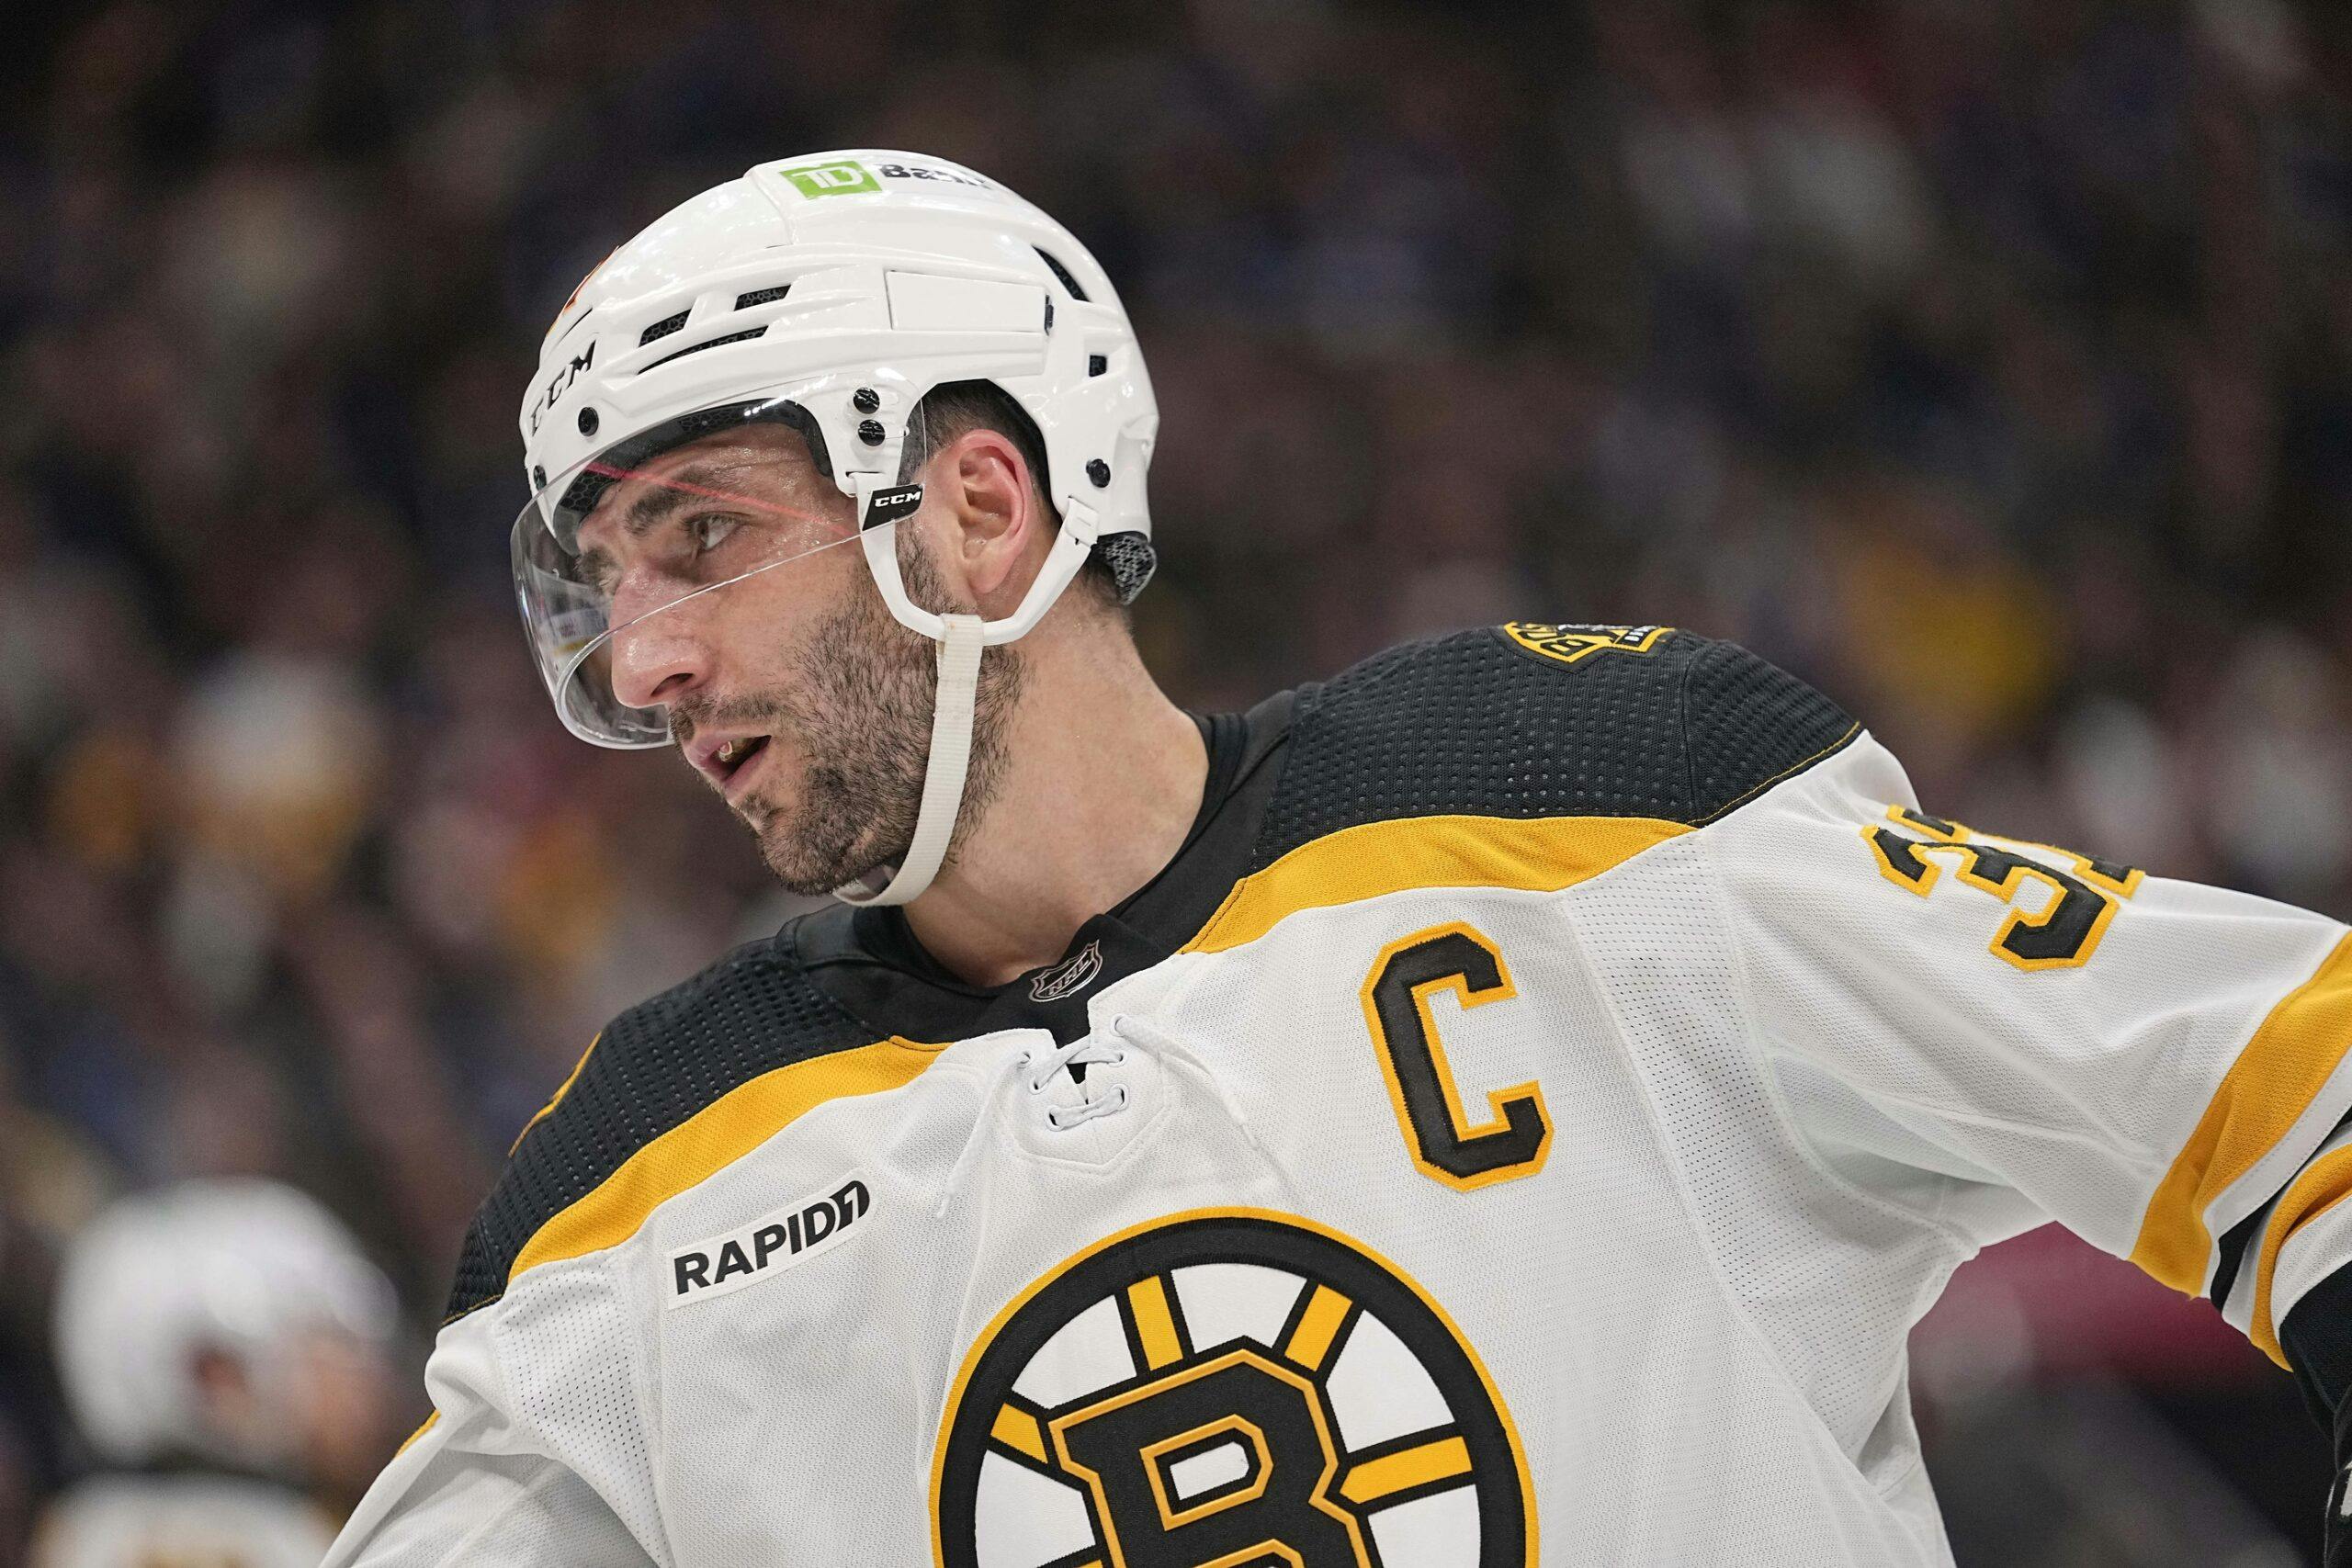 NHL roundup: Bruins edge Caps in OT to even series